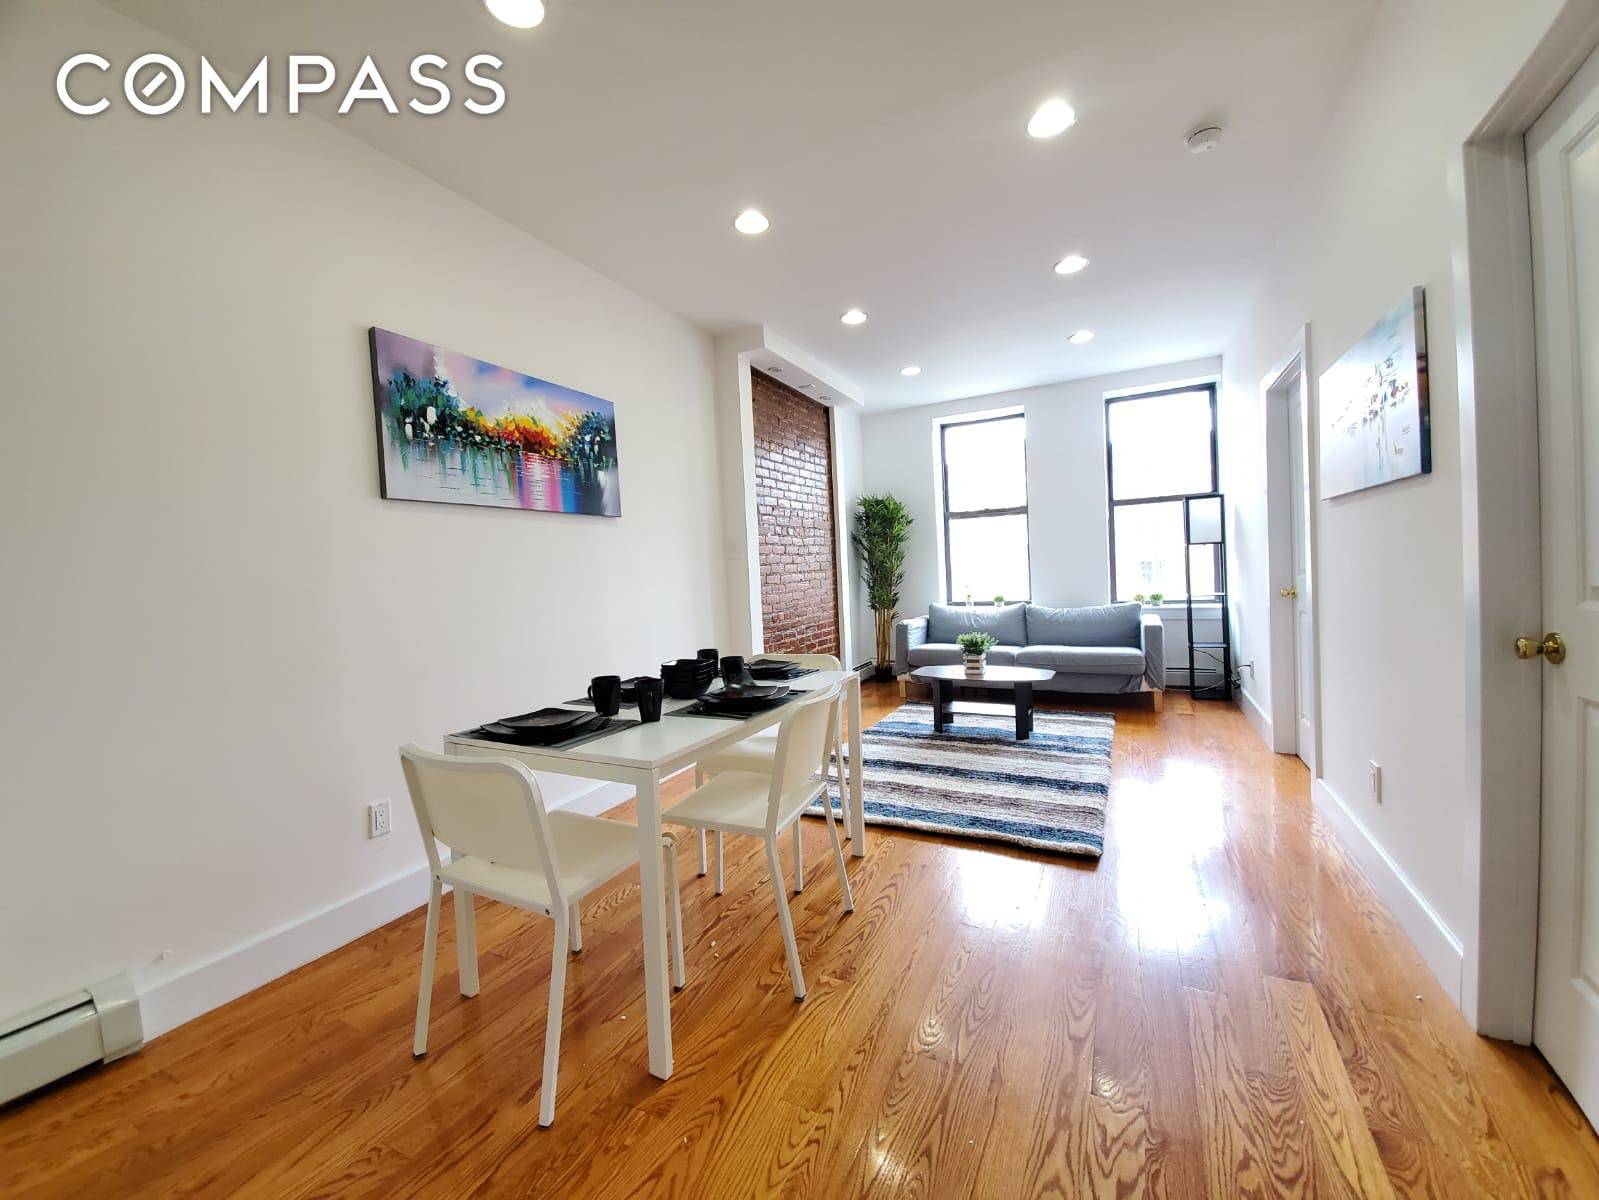 Magnificent 4 Bed 2 Bath, or 3bed Home Office, on beautiful Manhattan Ave in South Harlem Morningside.